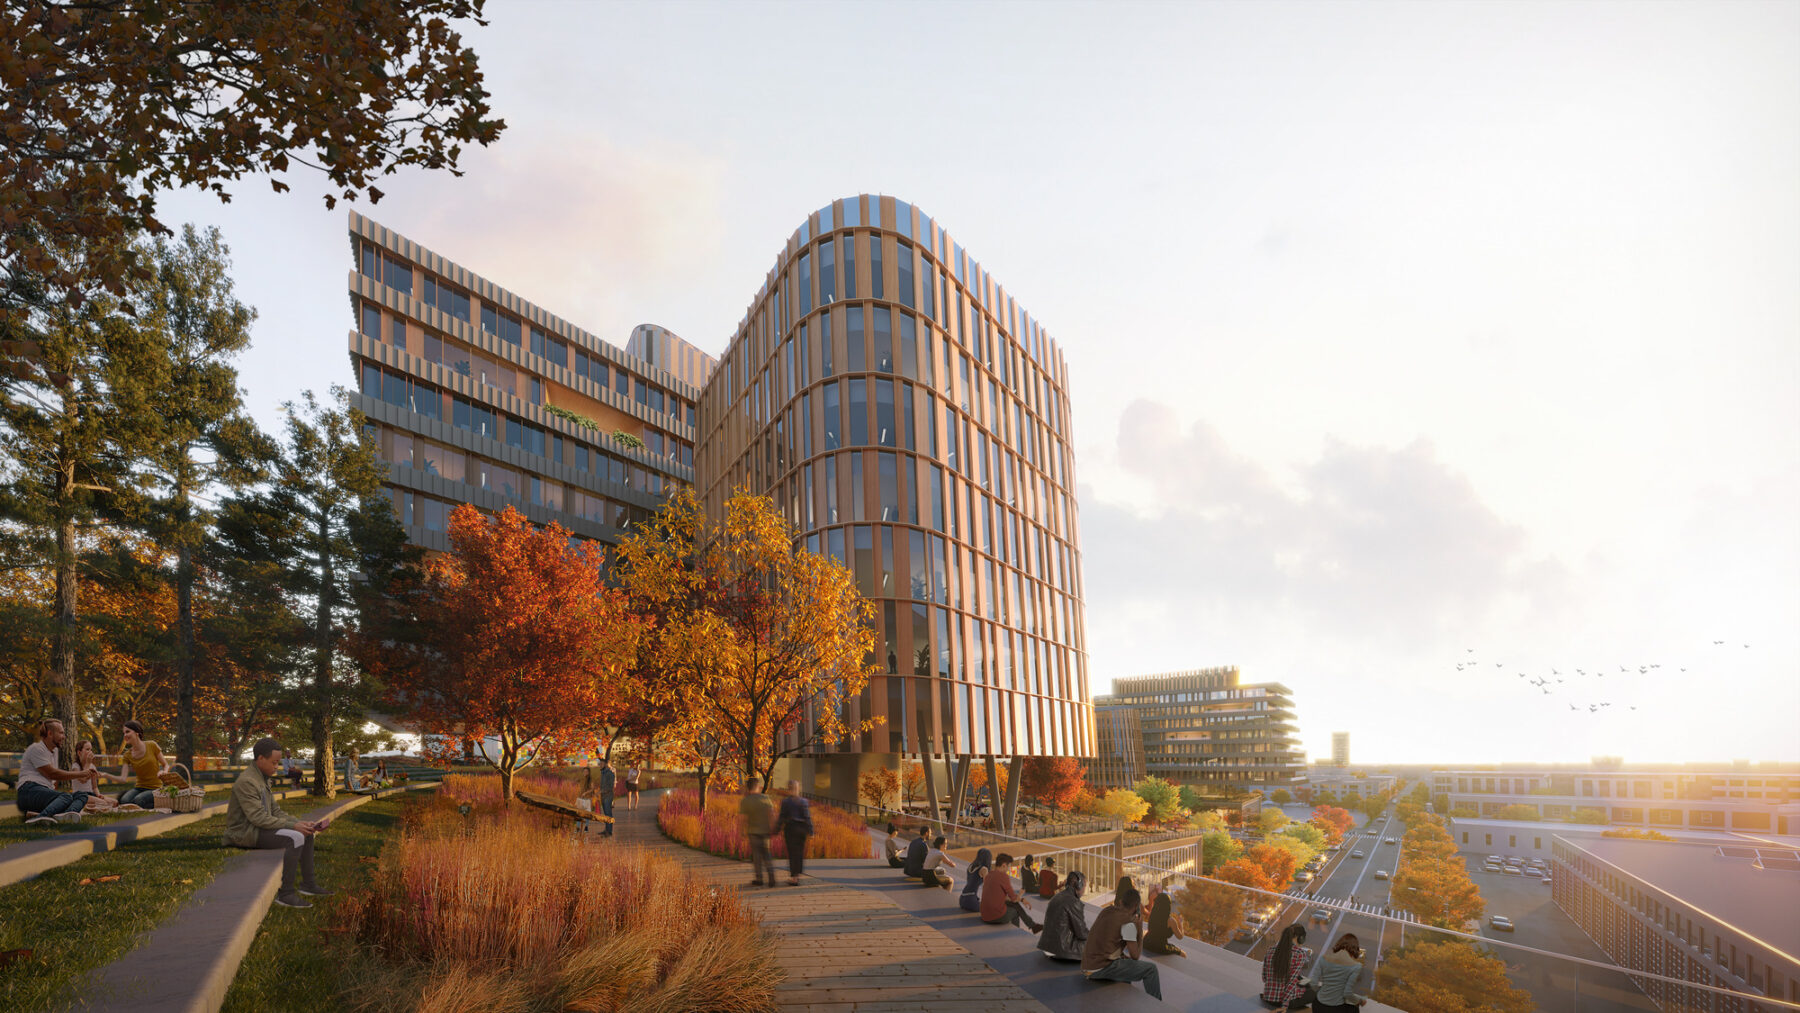 rendering of building facade with fall foliage surrounding entrance